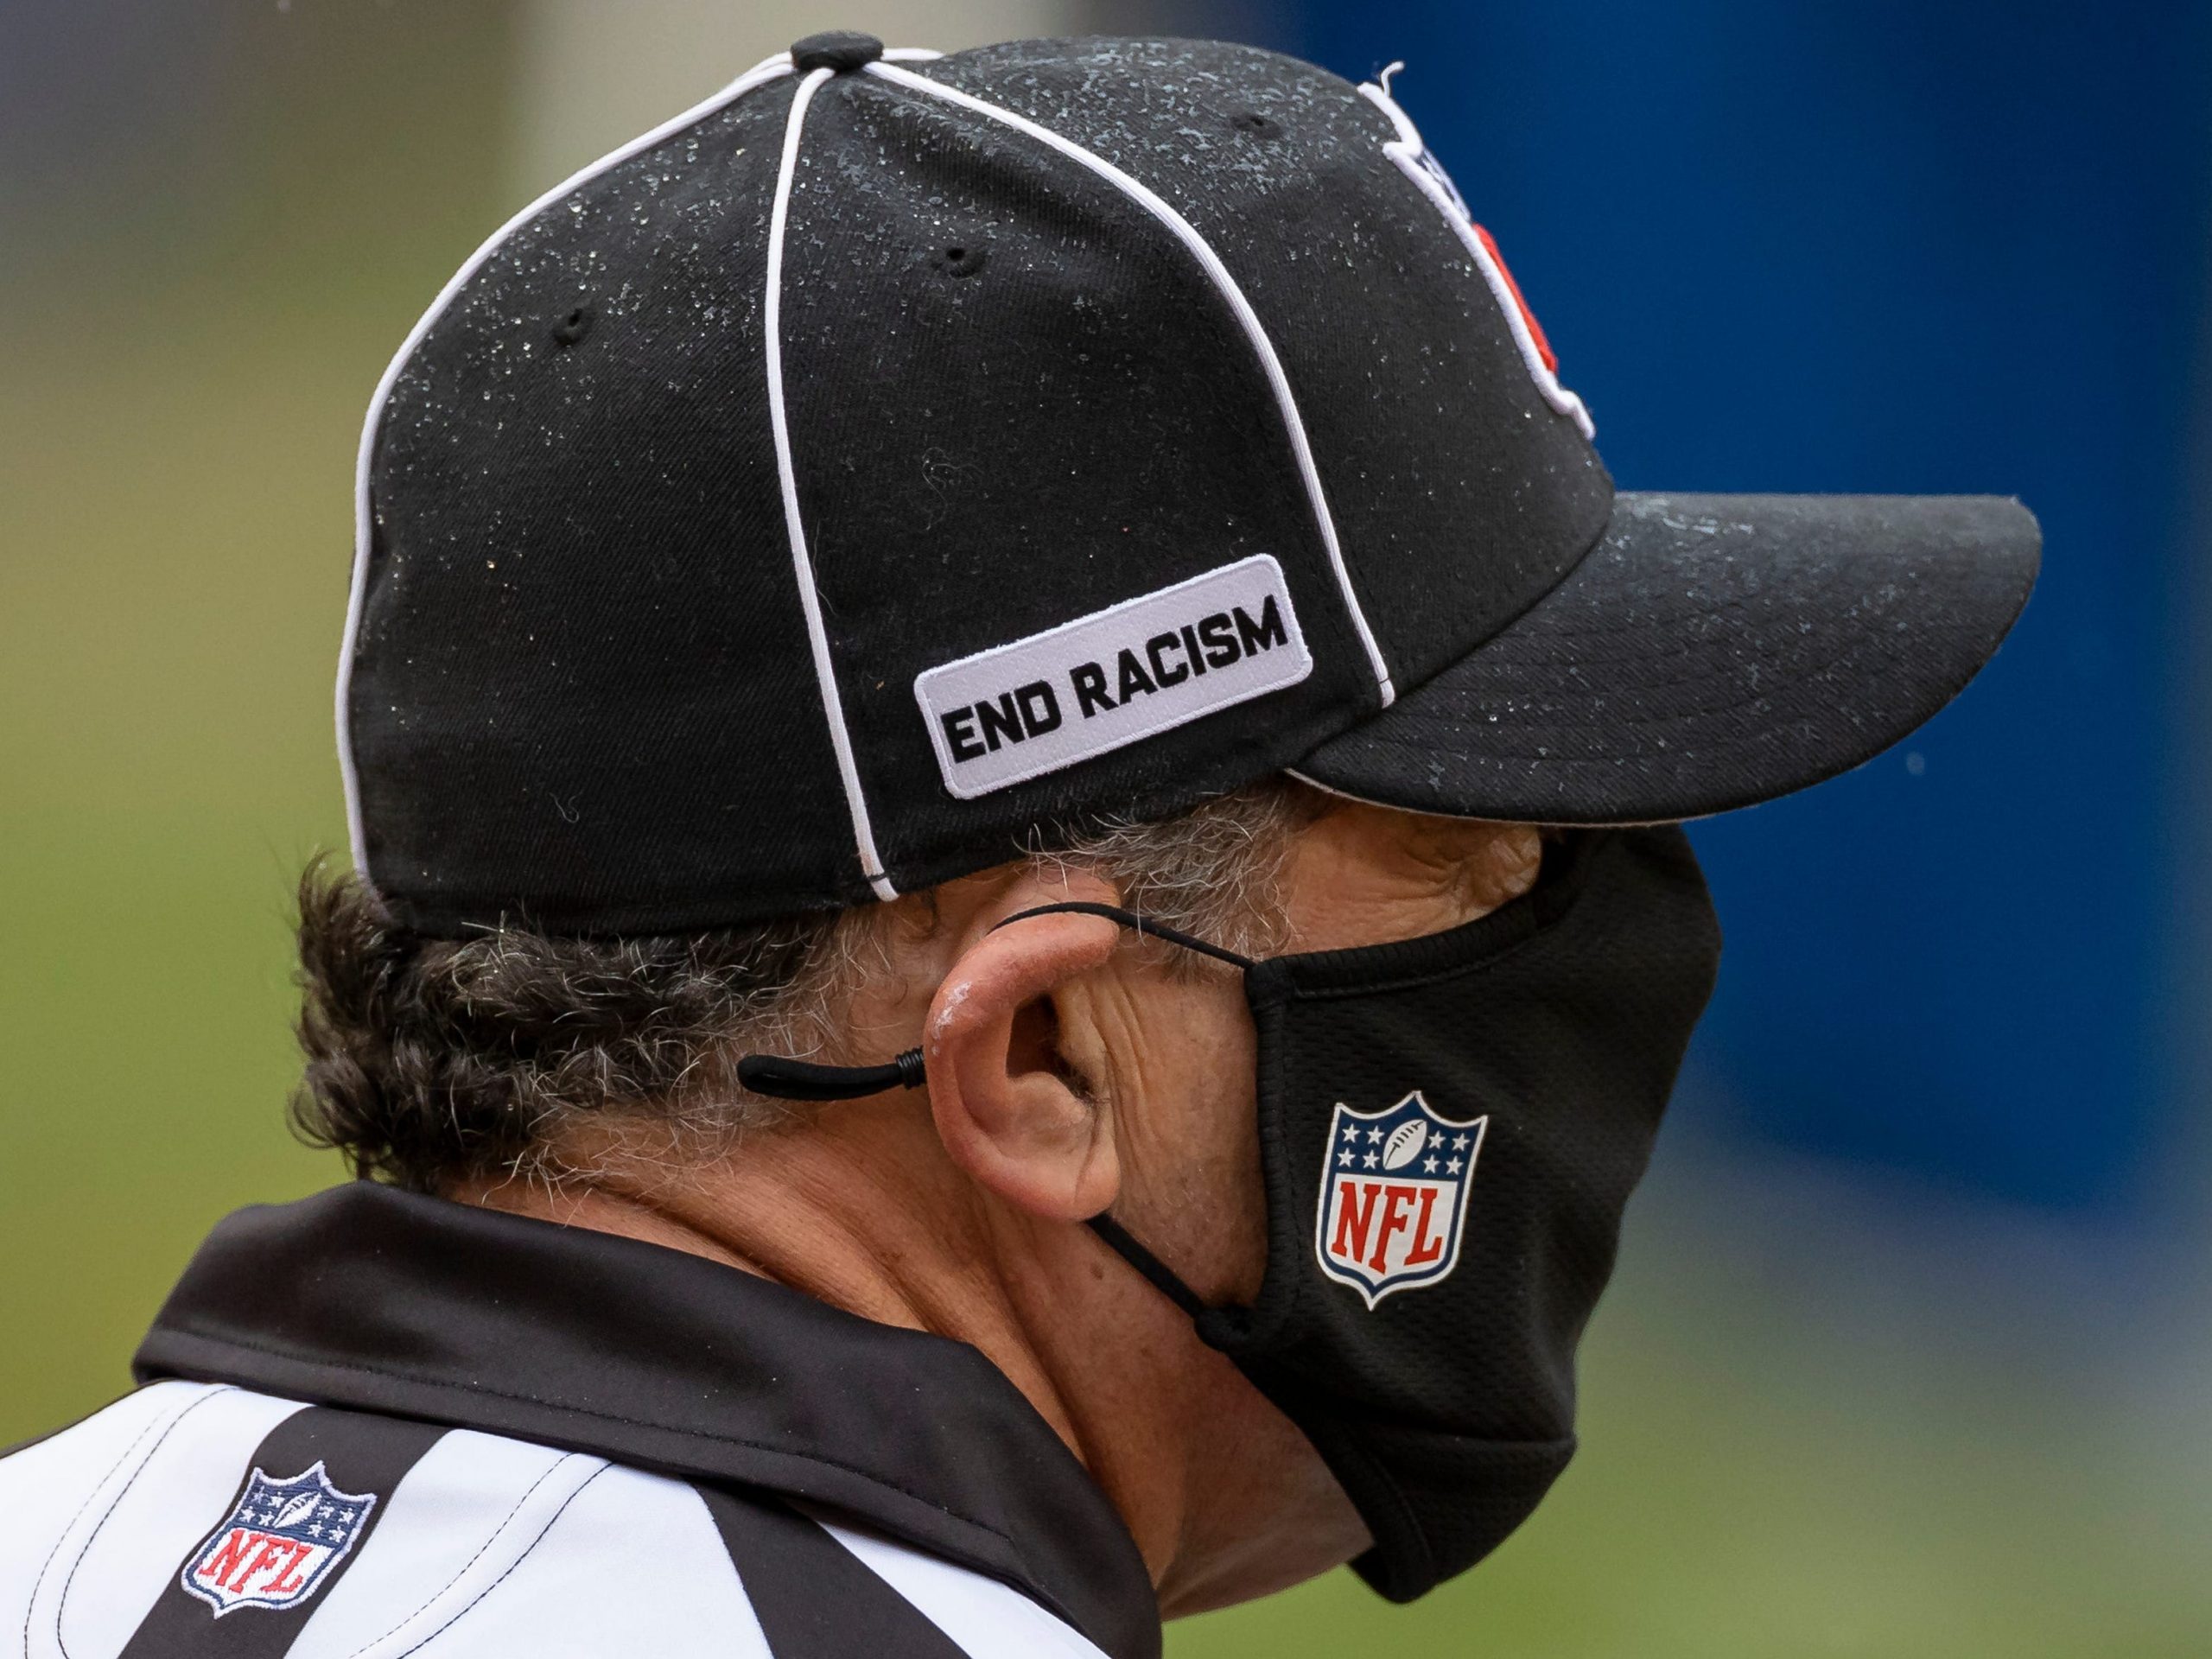 Down Judge Jim Mello #48 looks on while wearing a heat with an "End racism" logo during the first half of the game between the Washington Football Team and the Dallas Cowboys at FedExField on October 25, 2020 in Landover, Maryland.